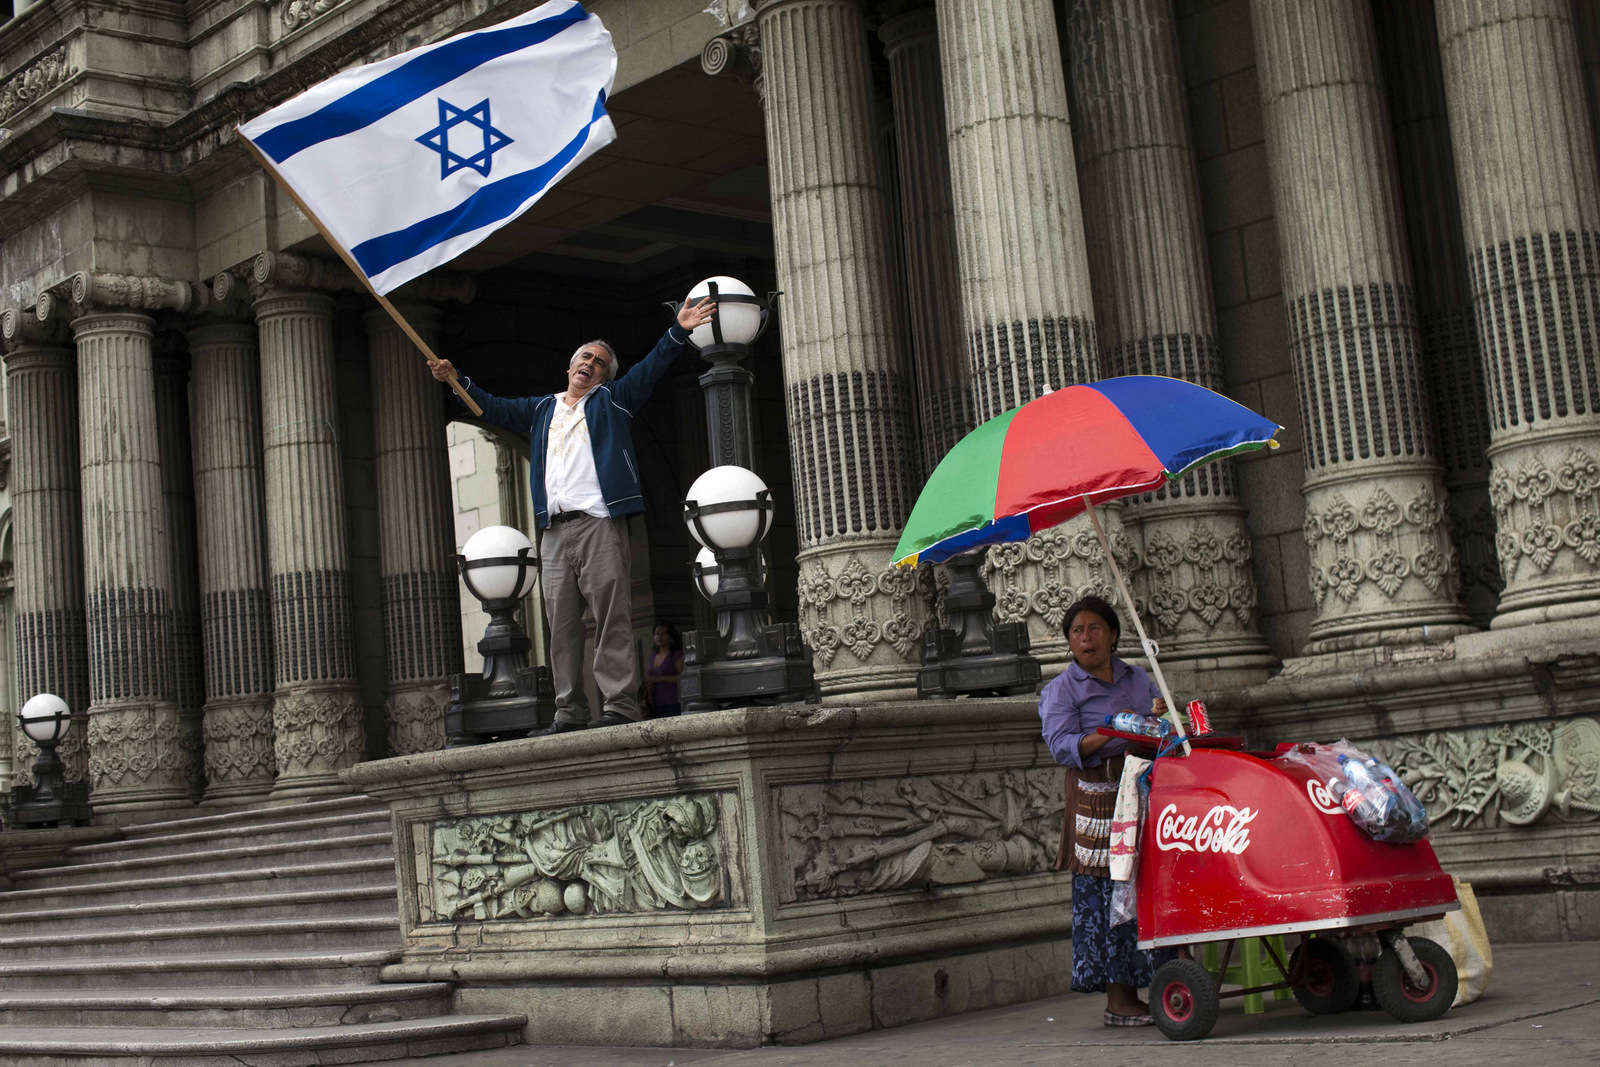 A man waves an Israeli flag during a protest against Guatemala's President Alvaro Colom decision of supporting the creation of a Palestinian state, in Guatemala City, Monday, Oct. 3, 2011. (AP/Rodrigo Abd)